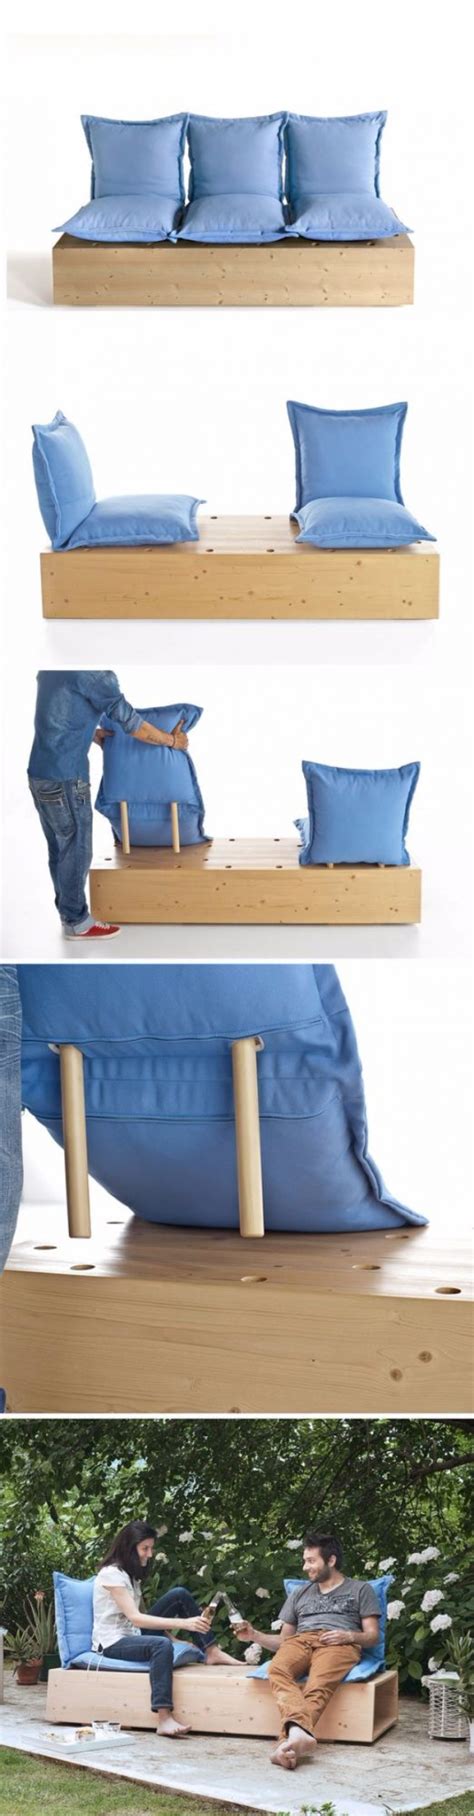 See more ideas about diy sofa, furniture, interior. 15 Cool DIY Couch Ideas For Indoors And Outdoors